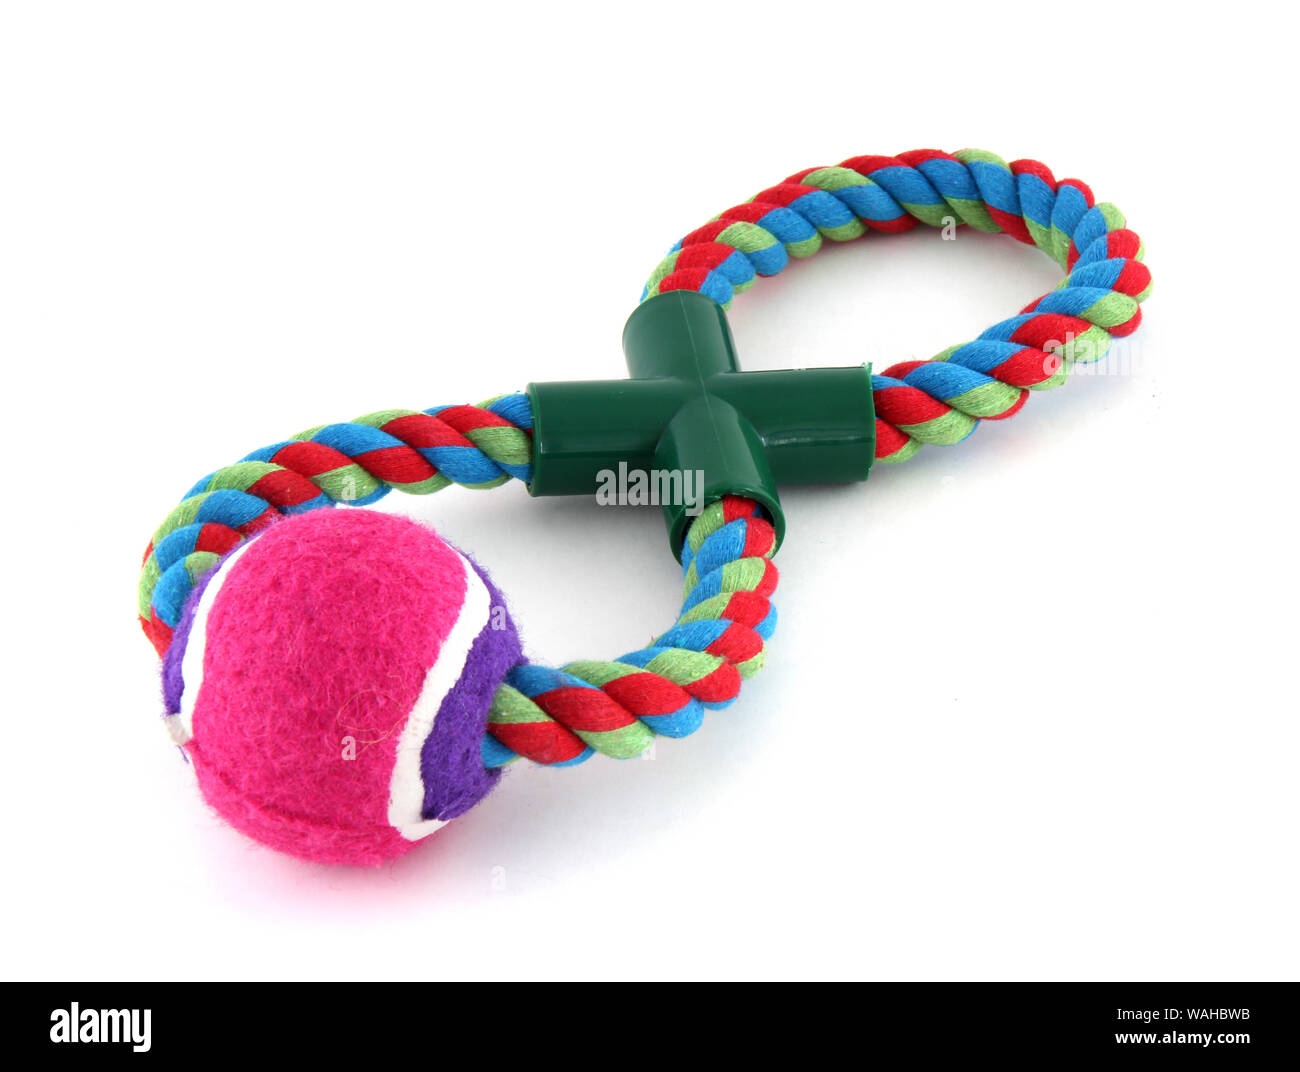 It's a pink tennis ball on a rope. It's for playing with a dog and dragging. Stock Photo